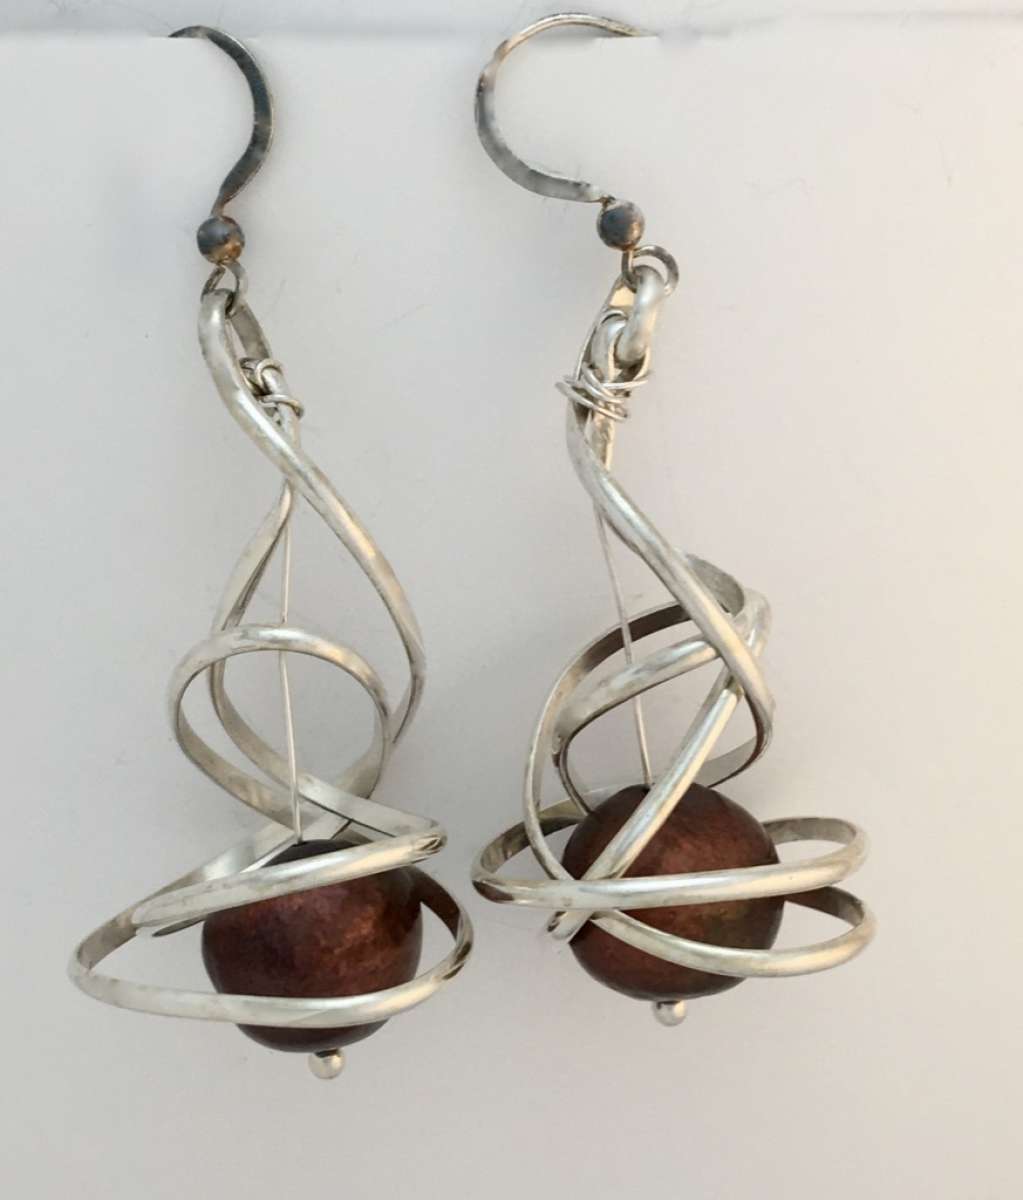 Twists and Turns Earring Chocolate Pearl